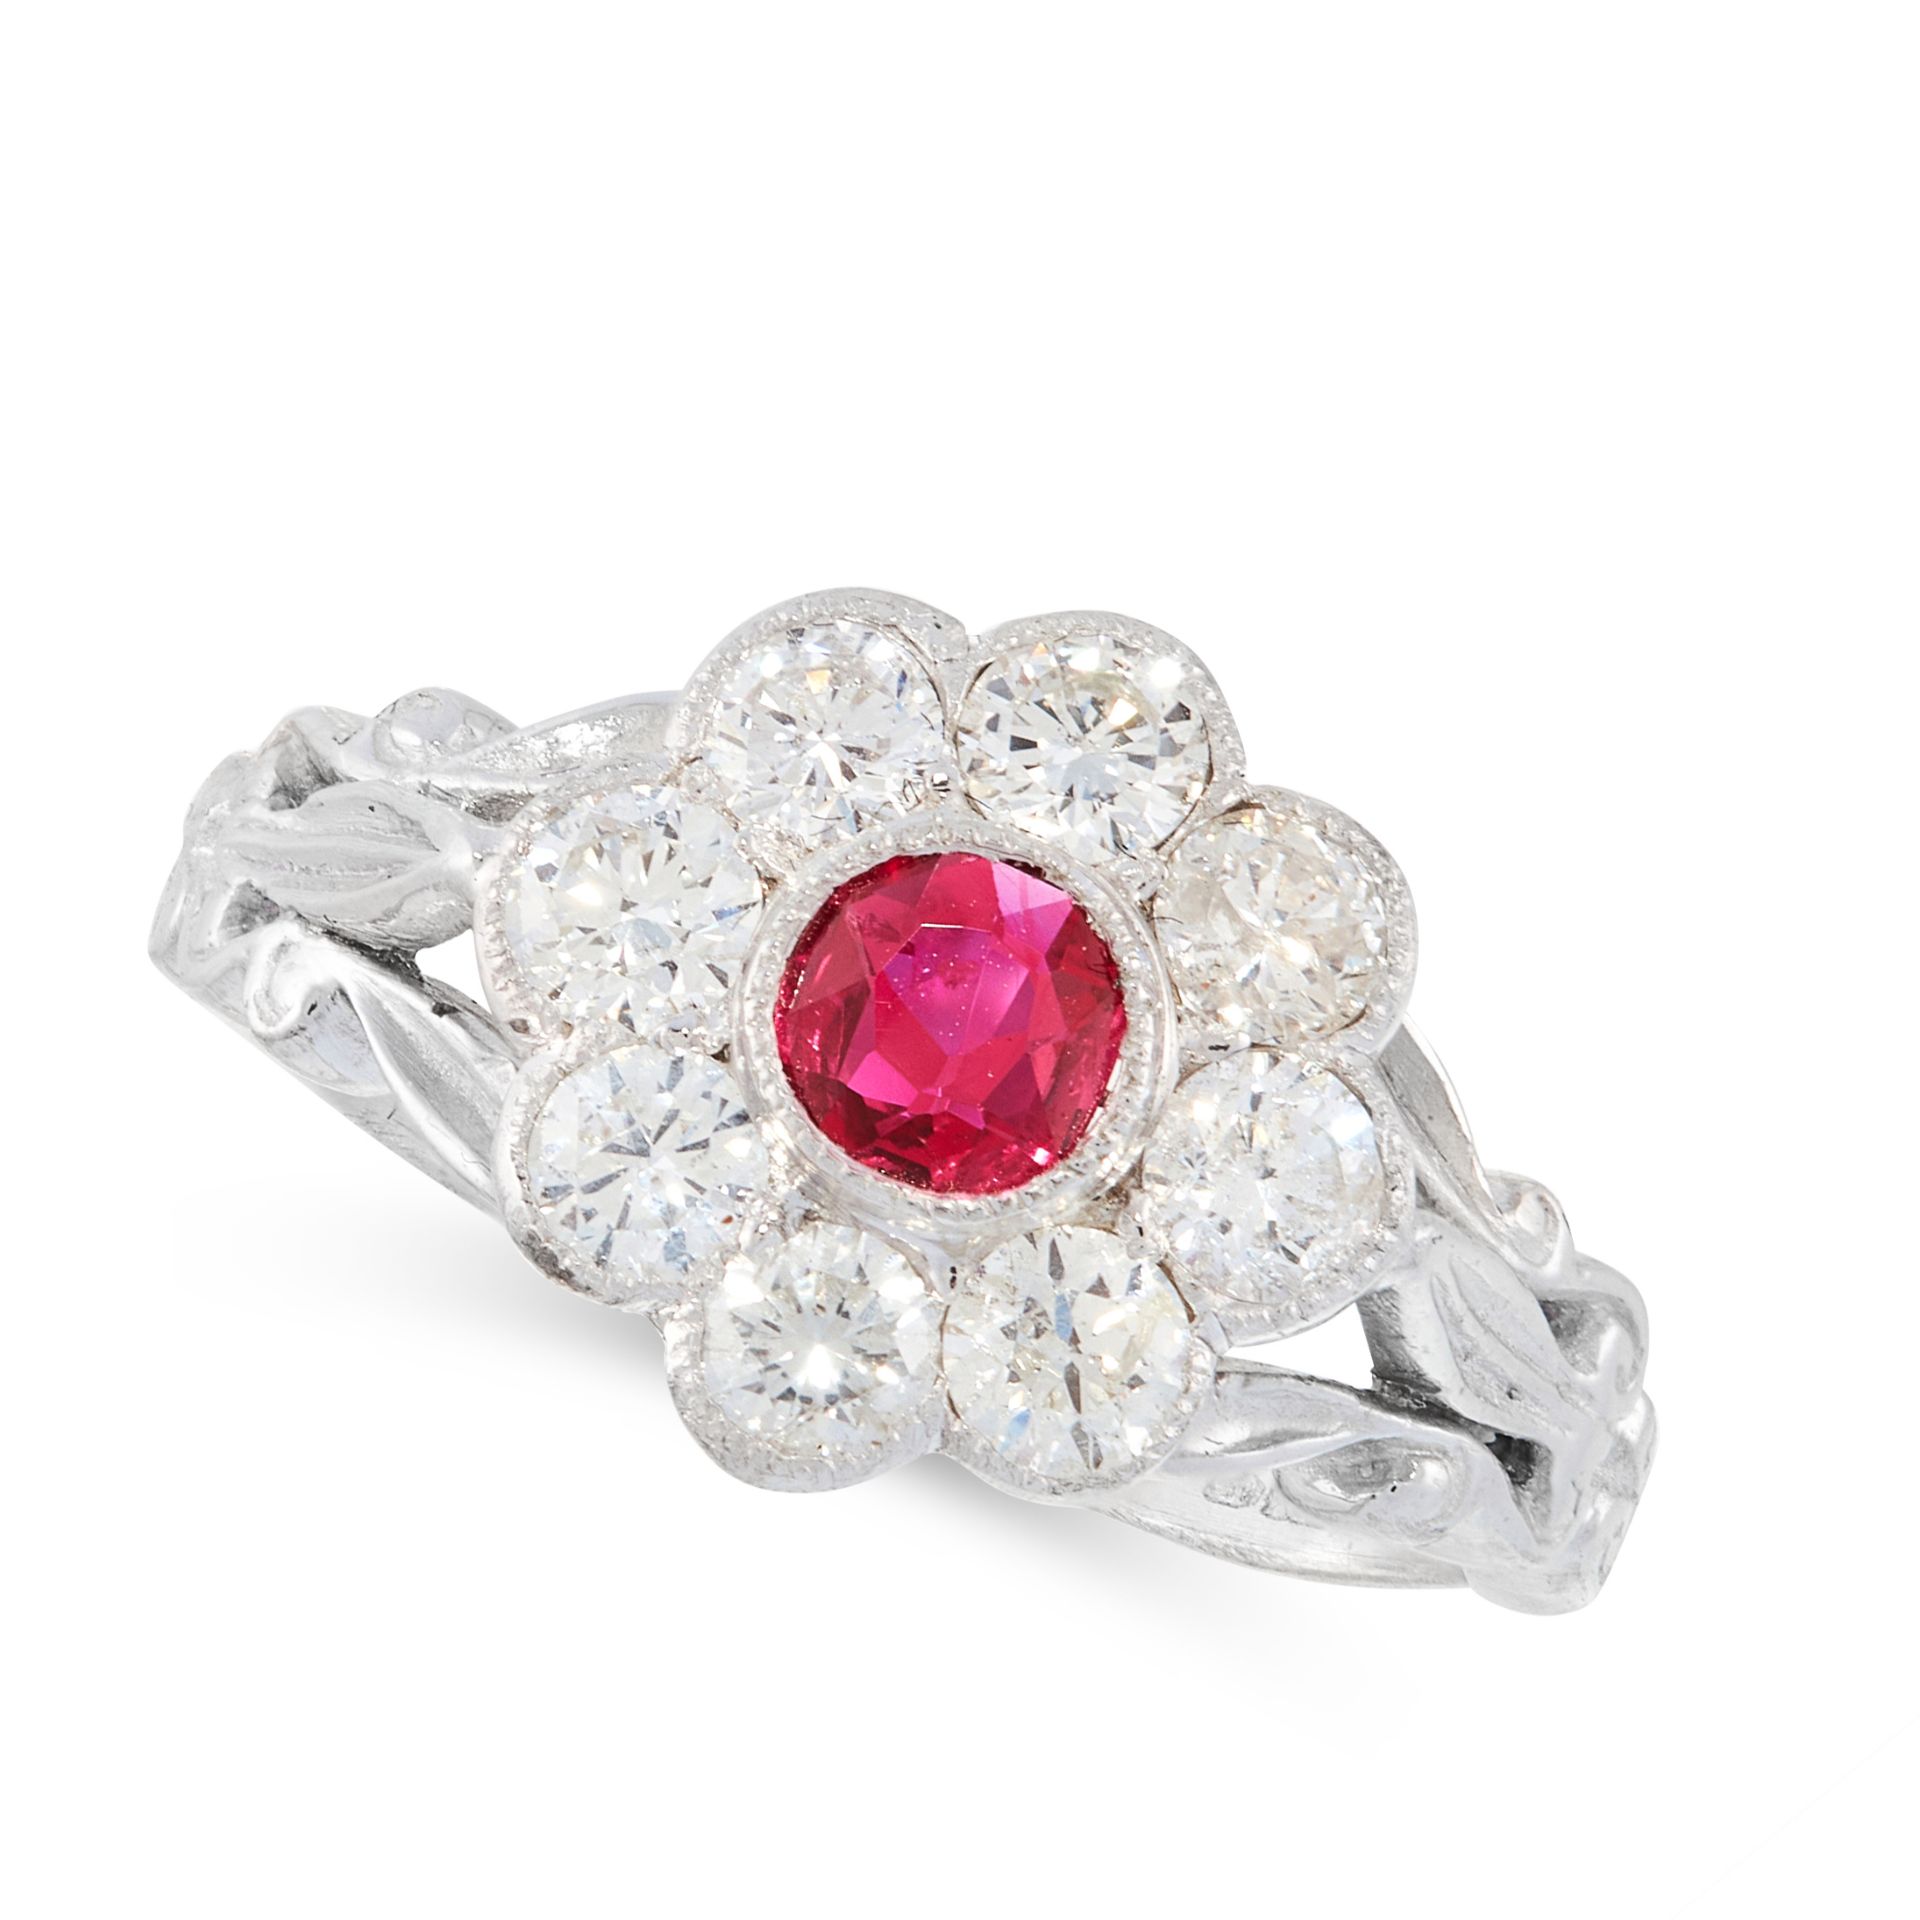 A VINTAGE RUBY AND DIAMOND CLUSTER RING in 18ct white gold, set with a round cut ruby within a